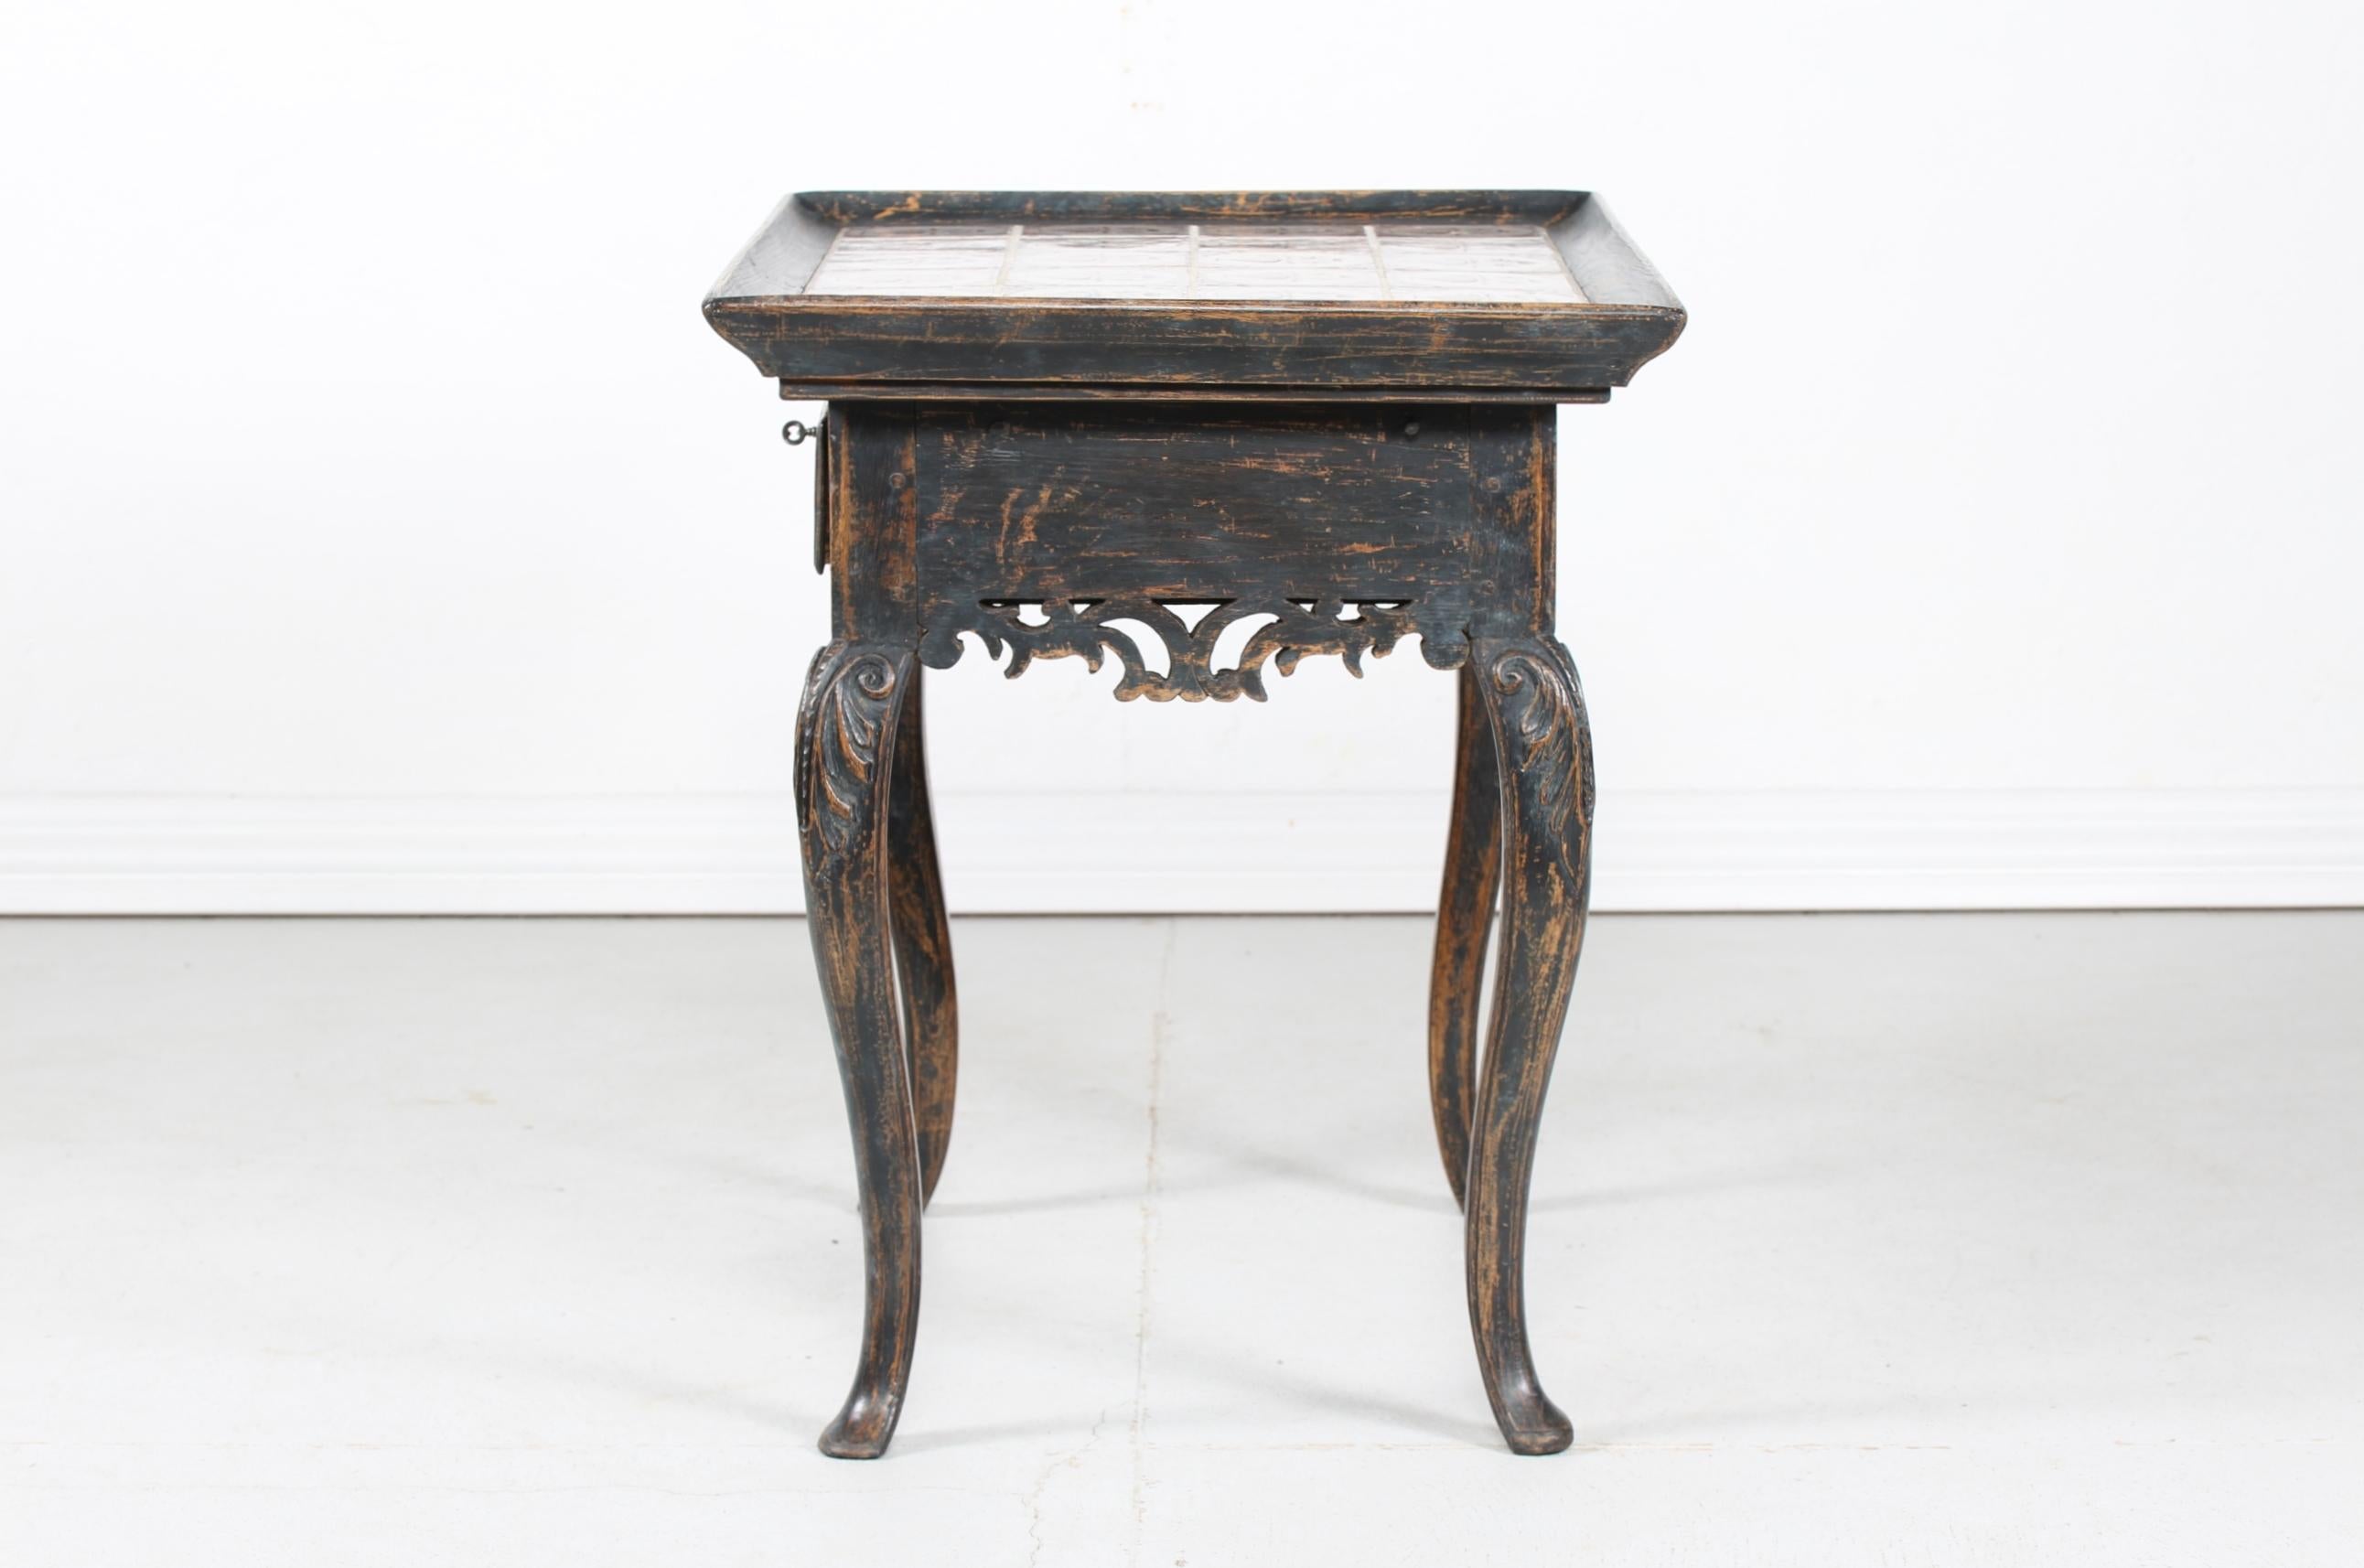 Wood Scandinavian Rococo Table from the 19th Century with Dutch Handpainted Tiles